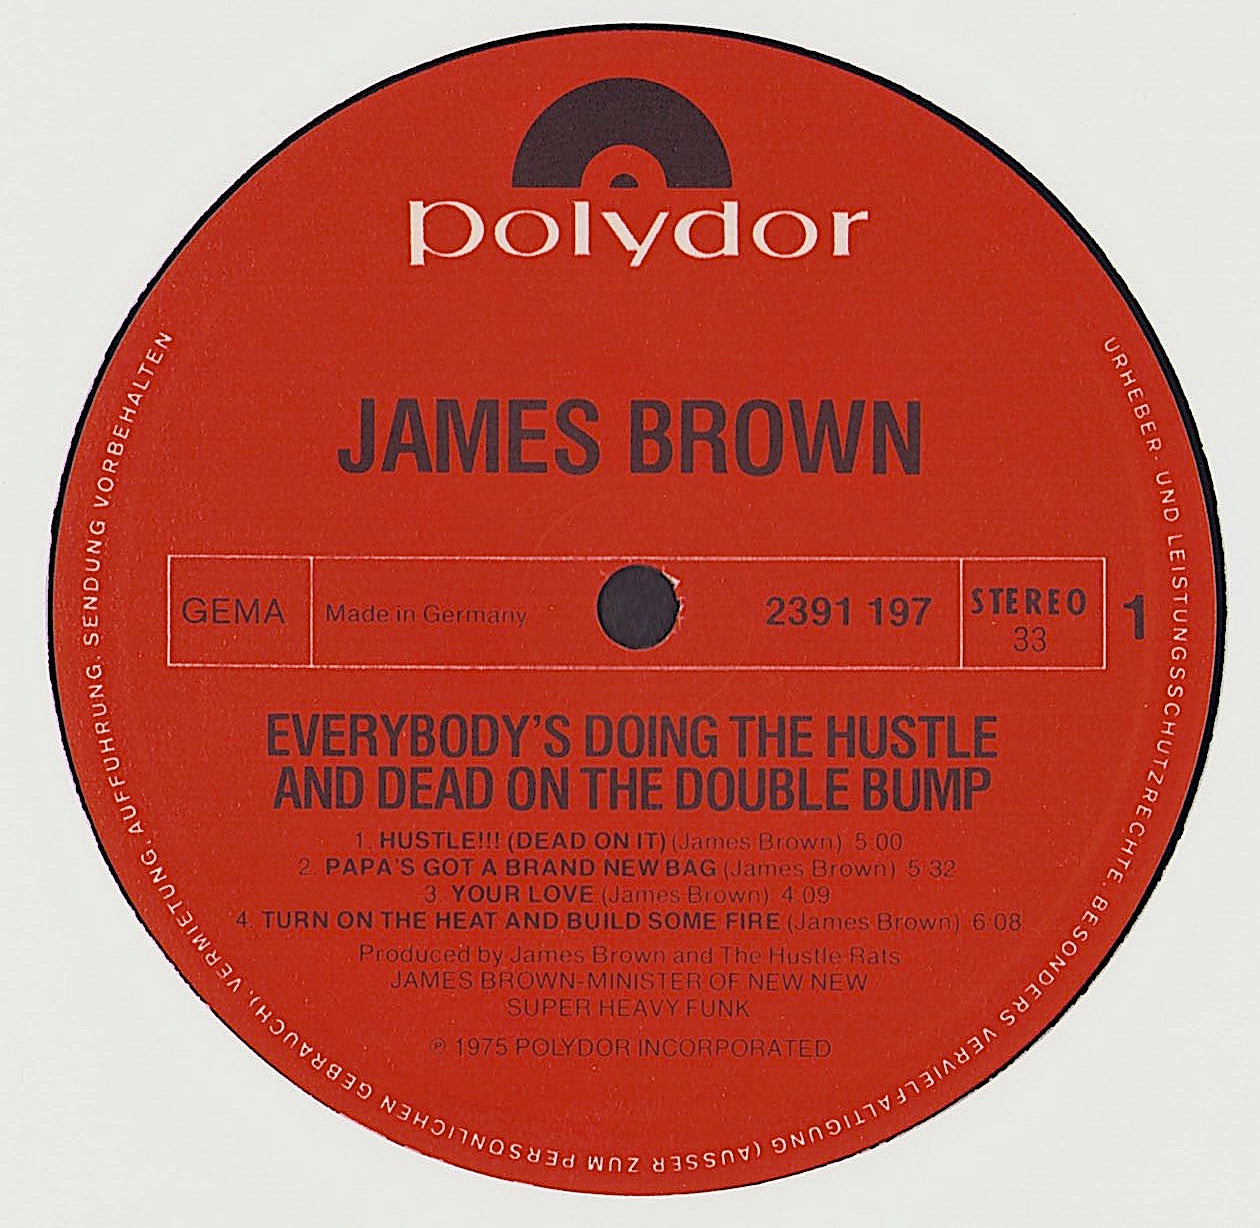 James Brown - Everybody's Doin' The Hustle & Dead On The Double Bump Vinyl LP